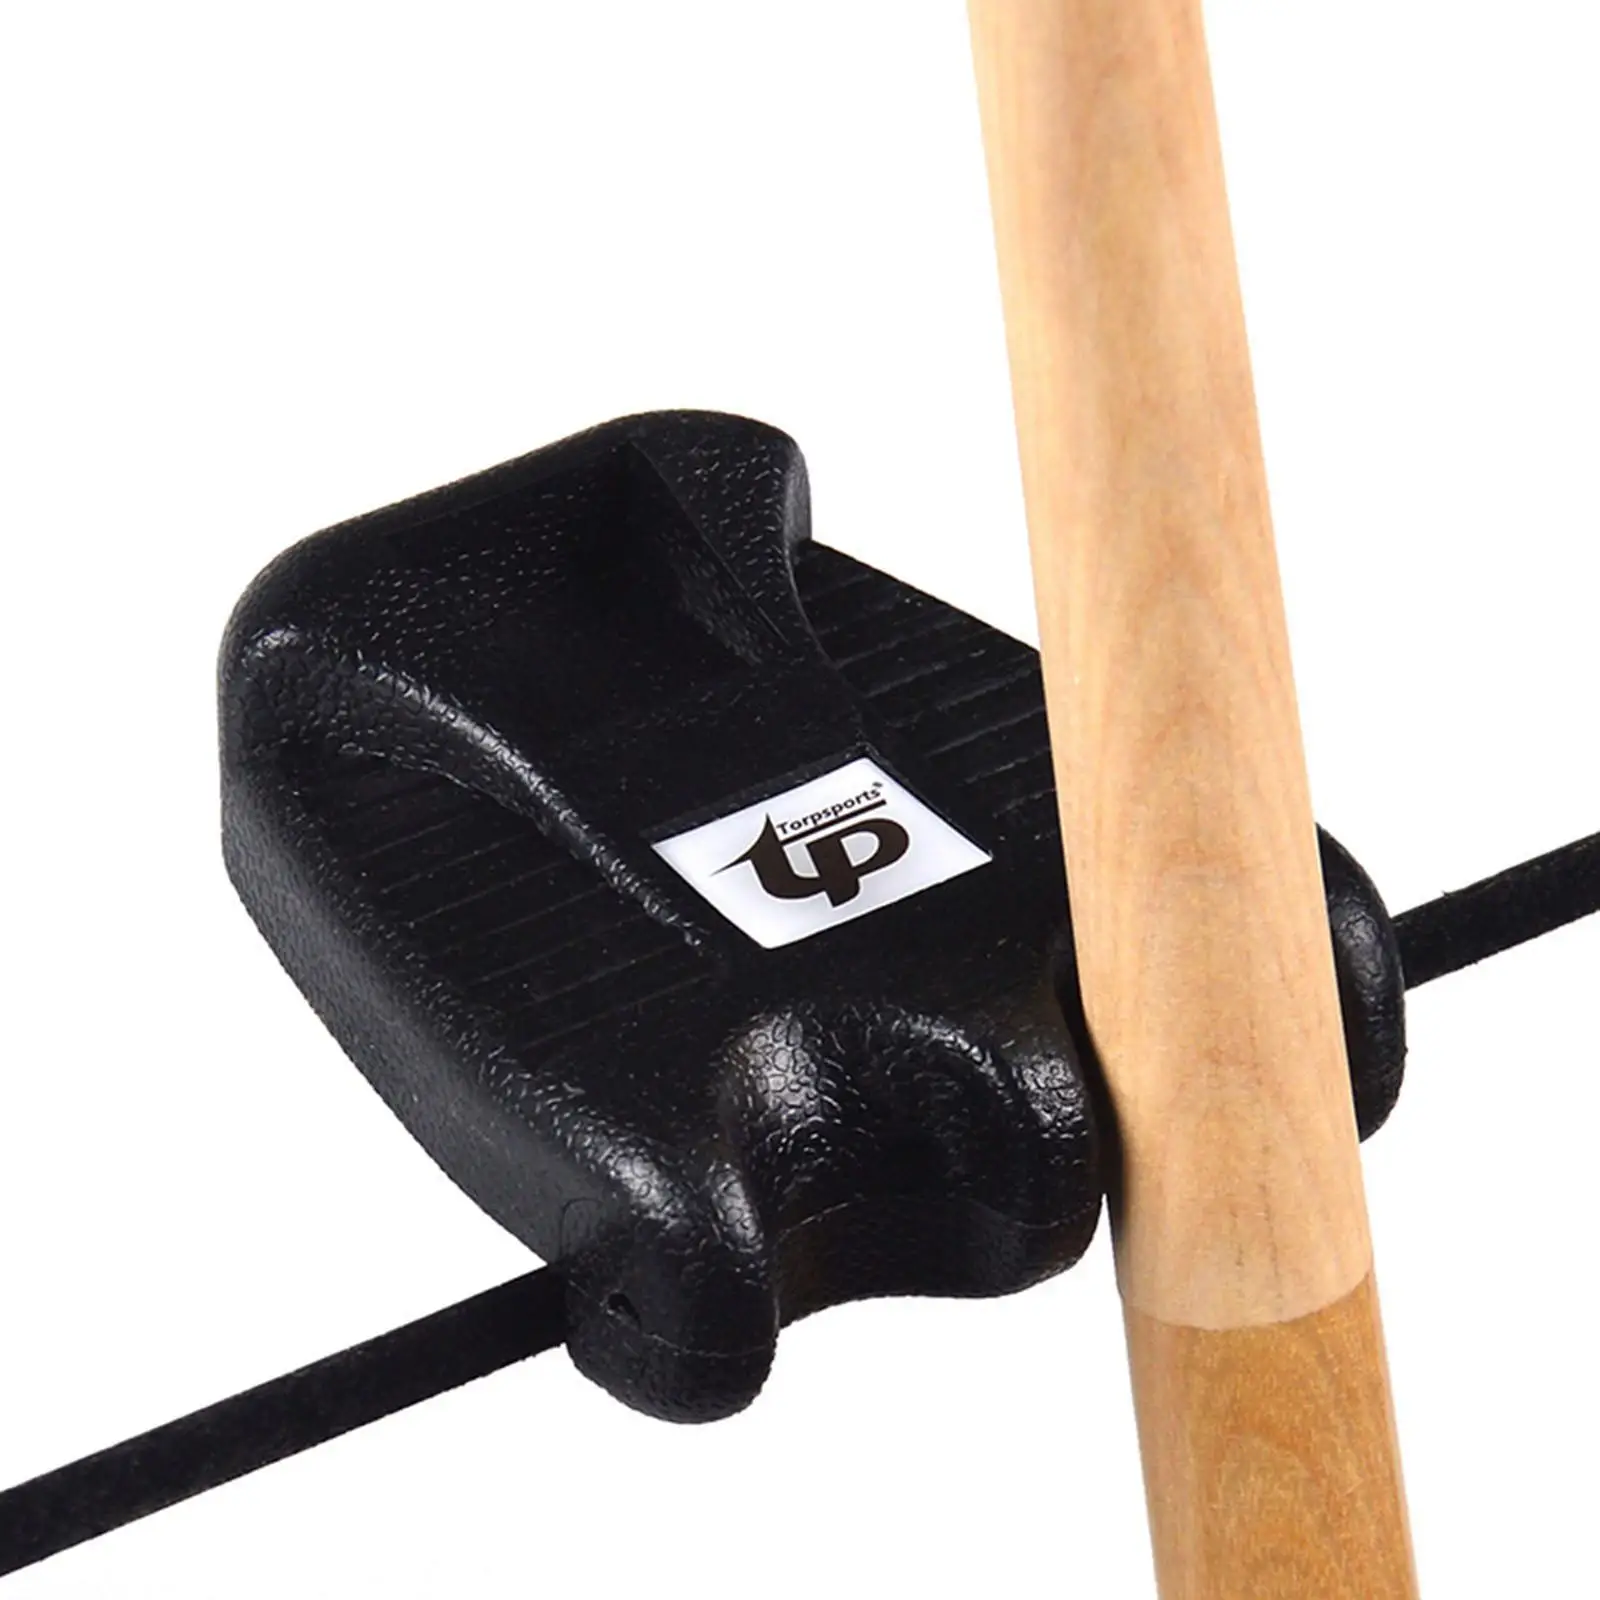 Durable Pool Cue Holder Portable Free Installation for Fishing Accessories